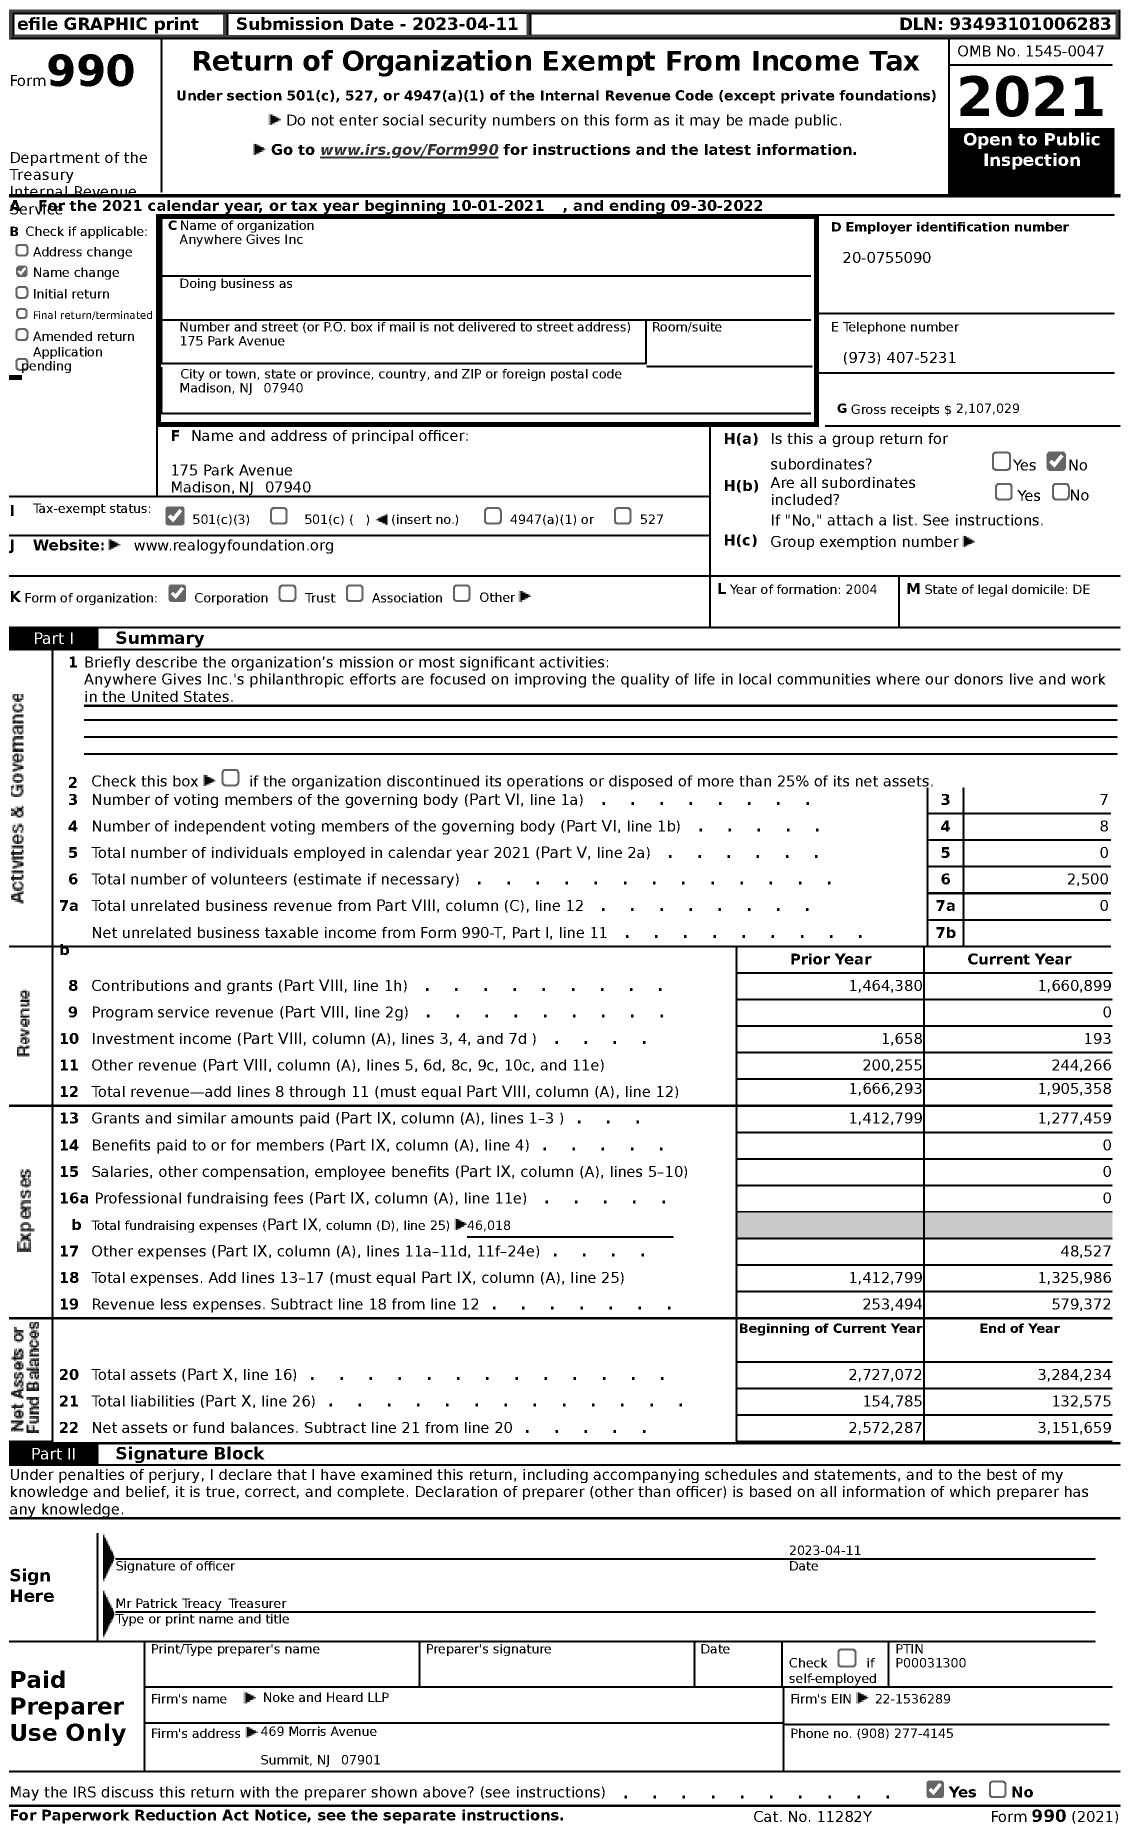 Image of first page of 2021 Form 990 for Anywhere Gives